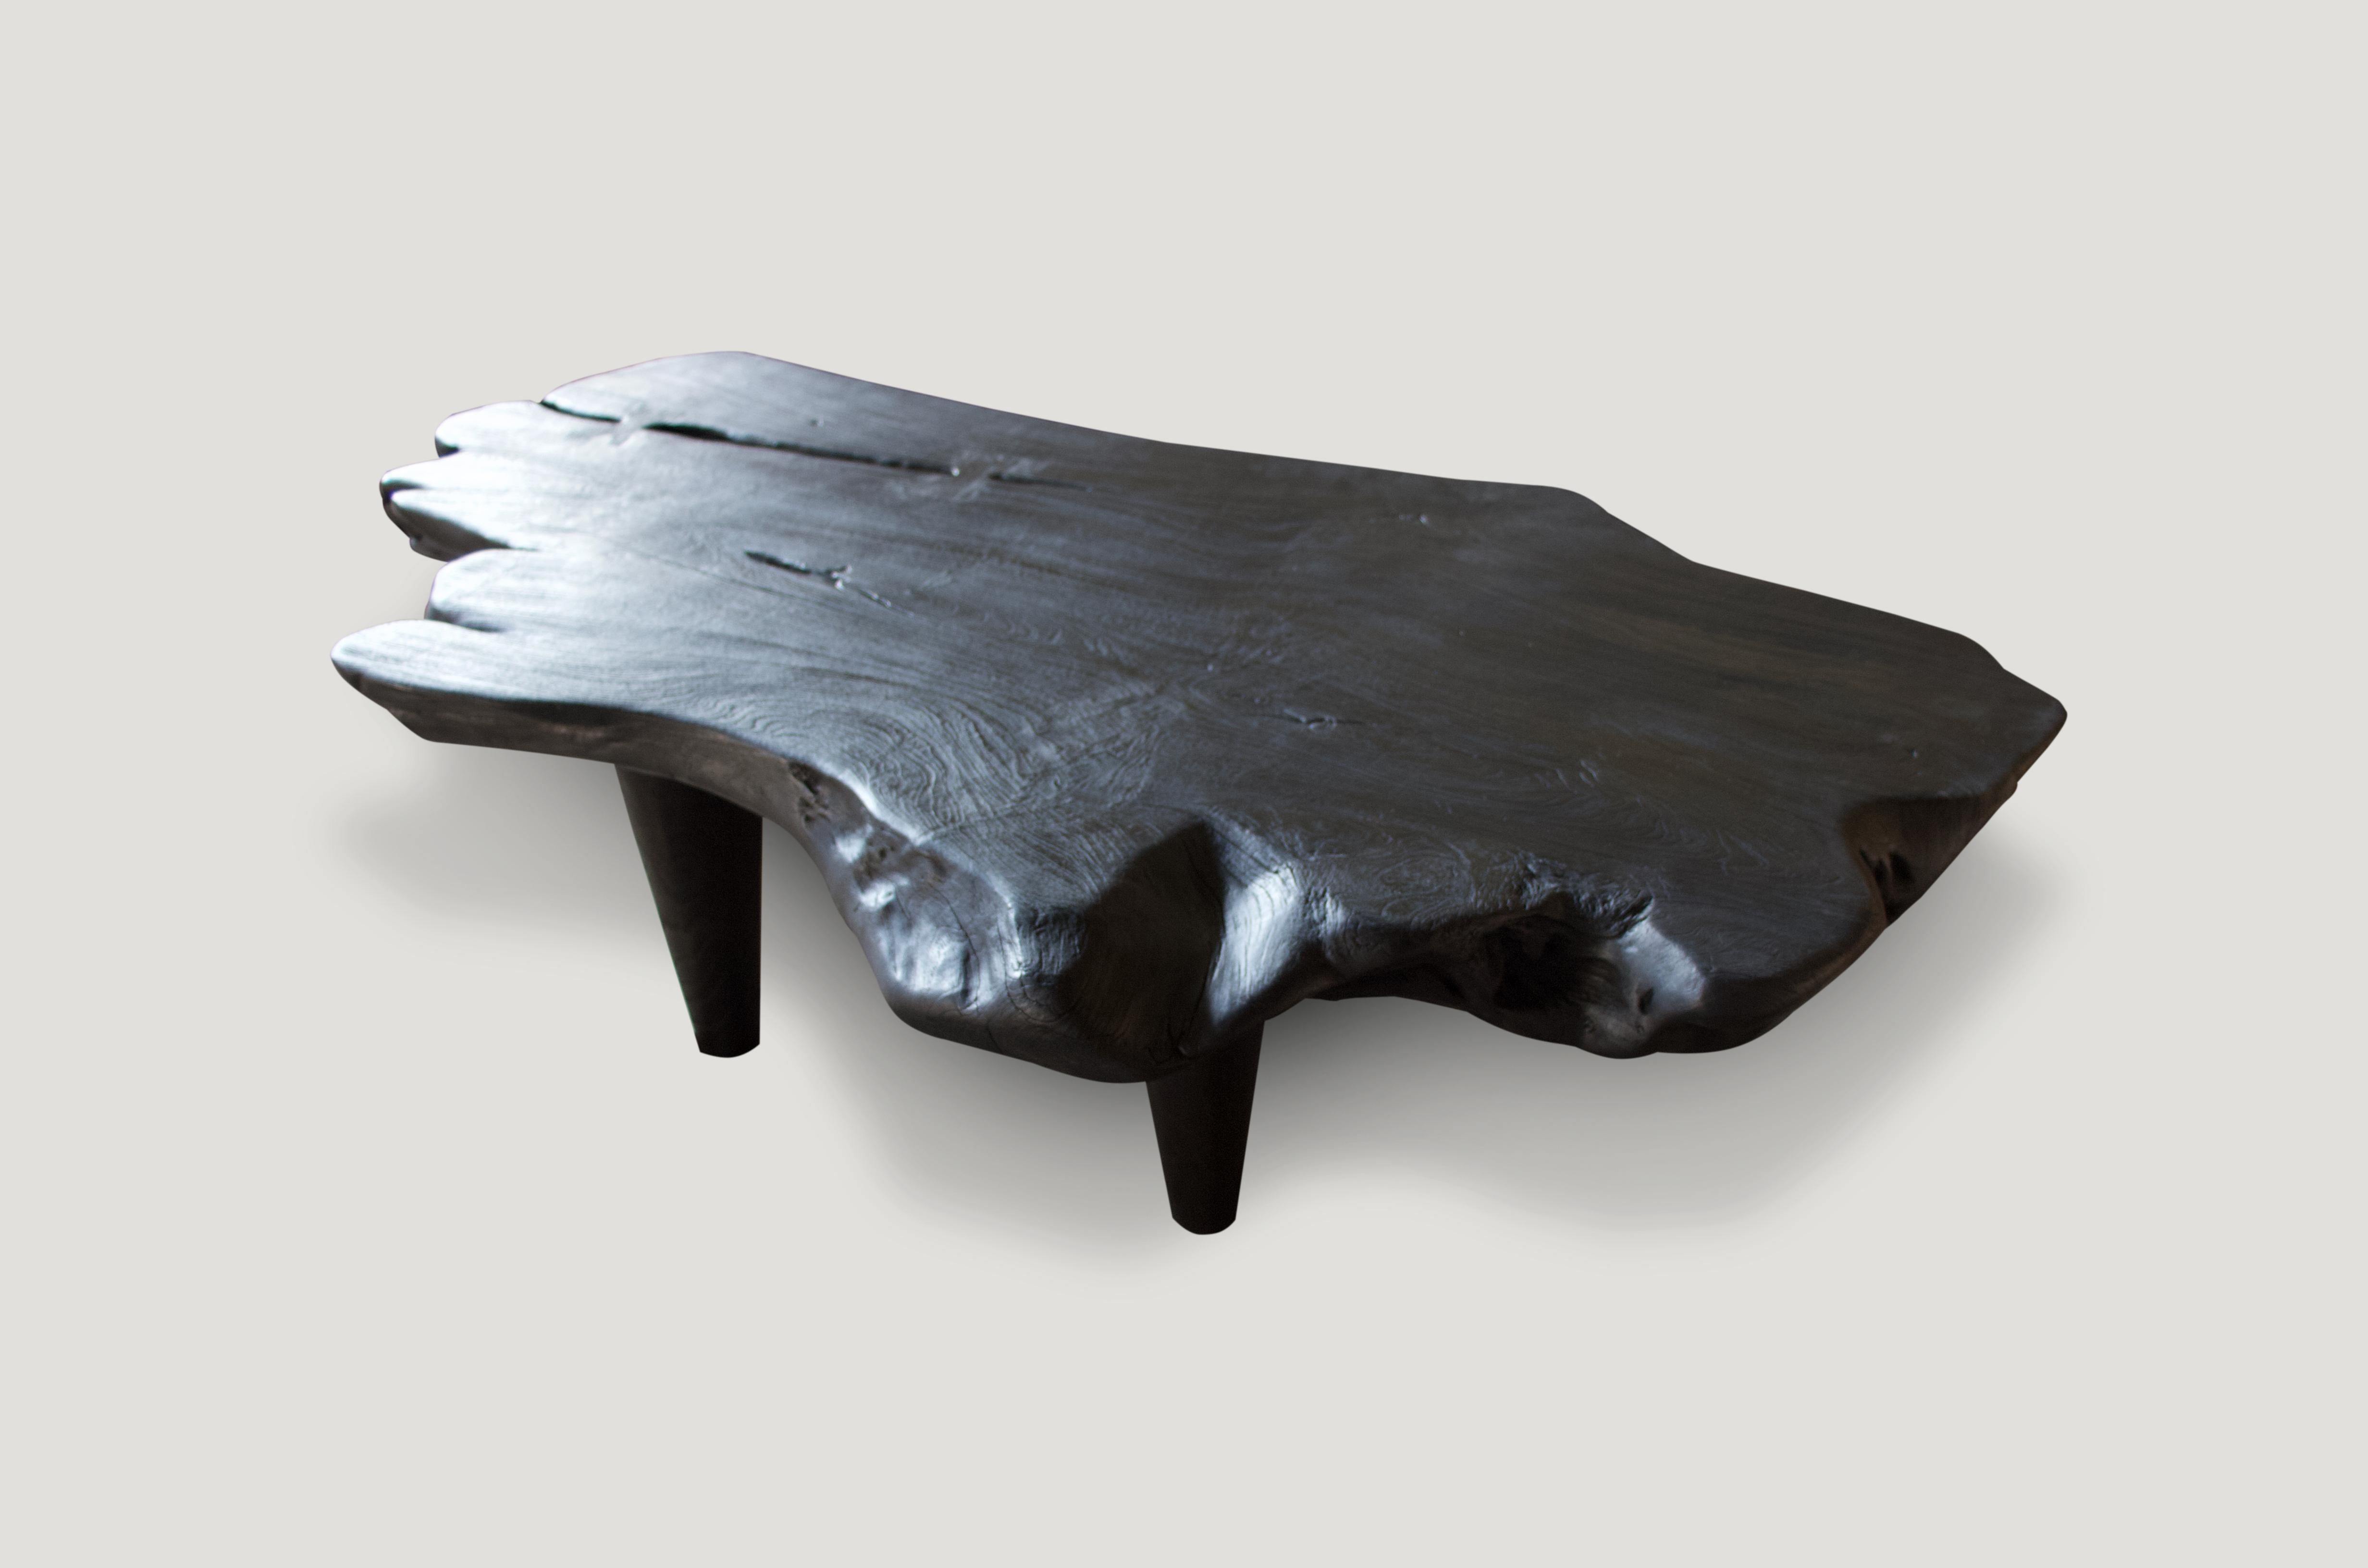 Single slab reclaimed teak wood coffee table with added butterfly details, set on midcentury style legs. A perfect combination of modern and organic.

The Triple Burnt collection represents a unique line of modern furniture made from solid organic